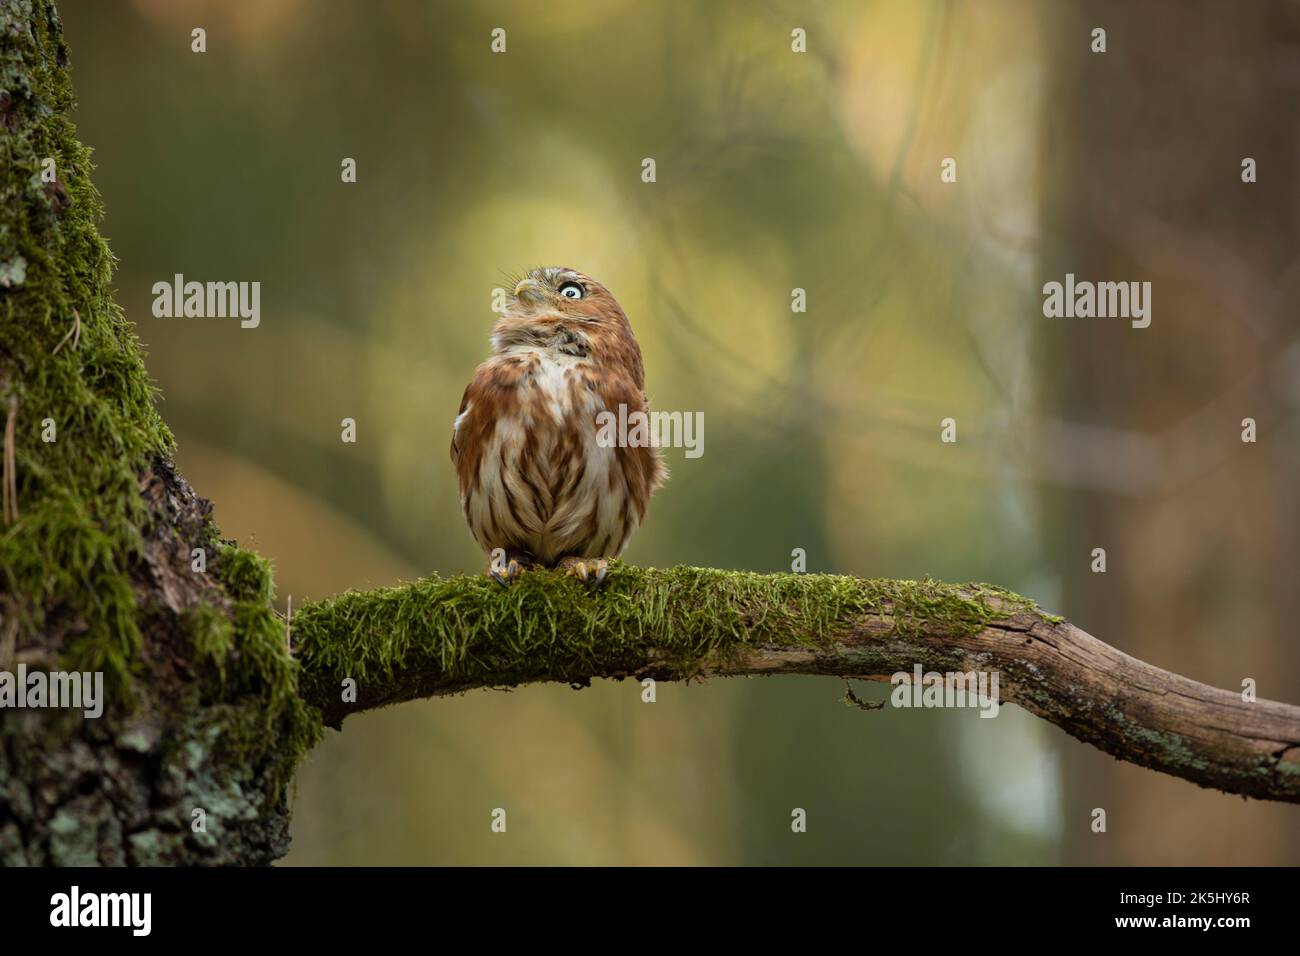 Pygmy Owl, sitting on tree branch with clear forest background. Eurasian tinny bird in the habitat. Beautiful bird on mossy branch.Wildlife scene from Stock Photo